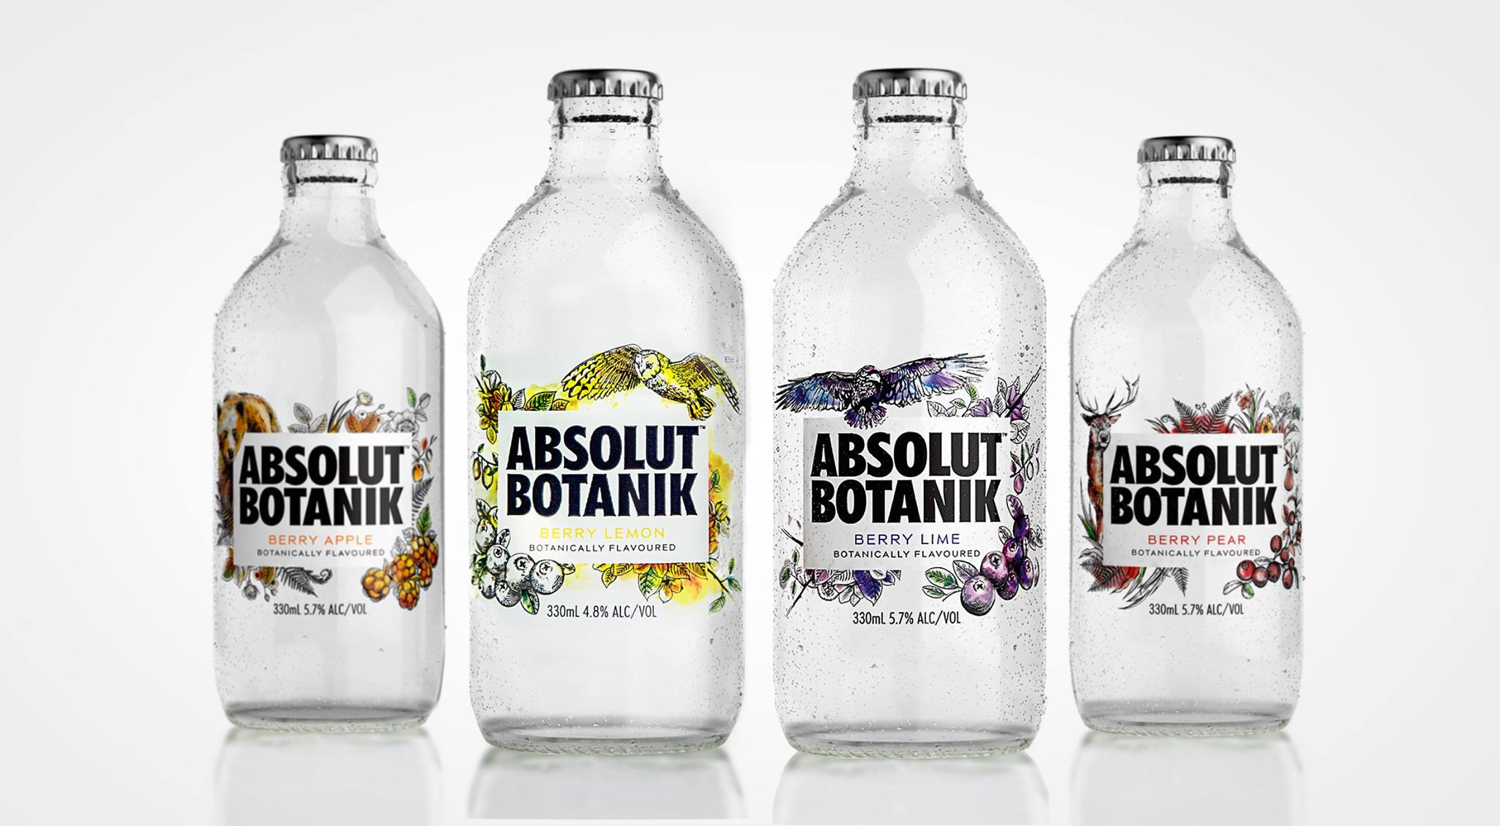 Packaging for Absolut Botanik by graphic design studio Bold Inc.